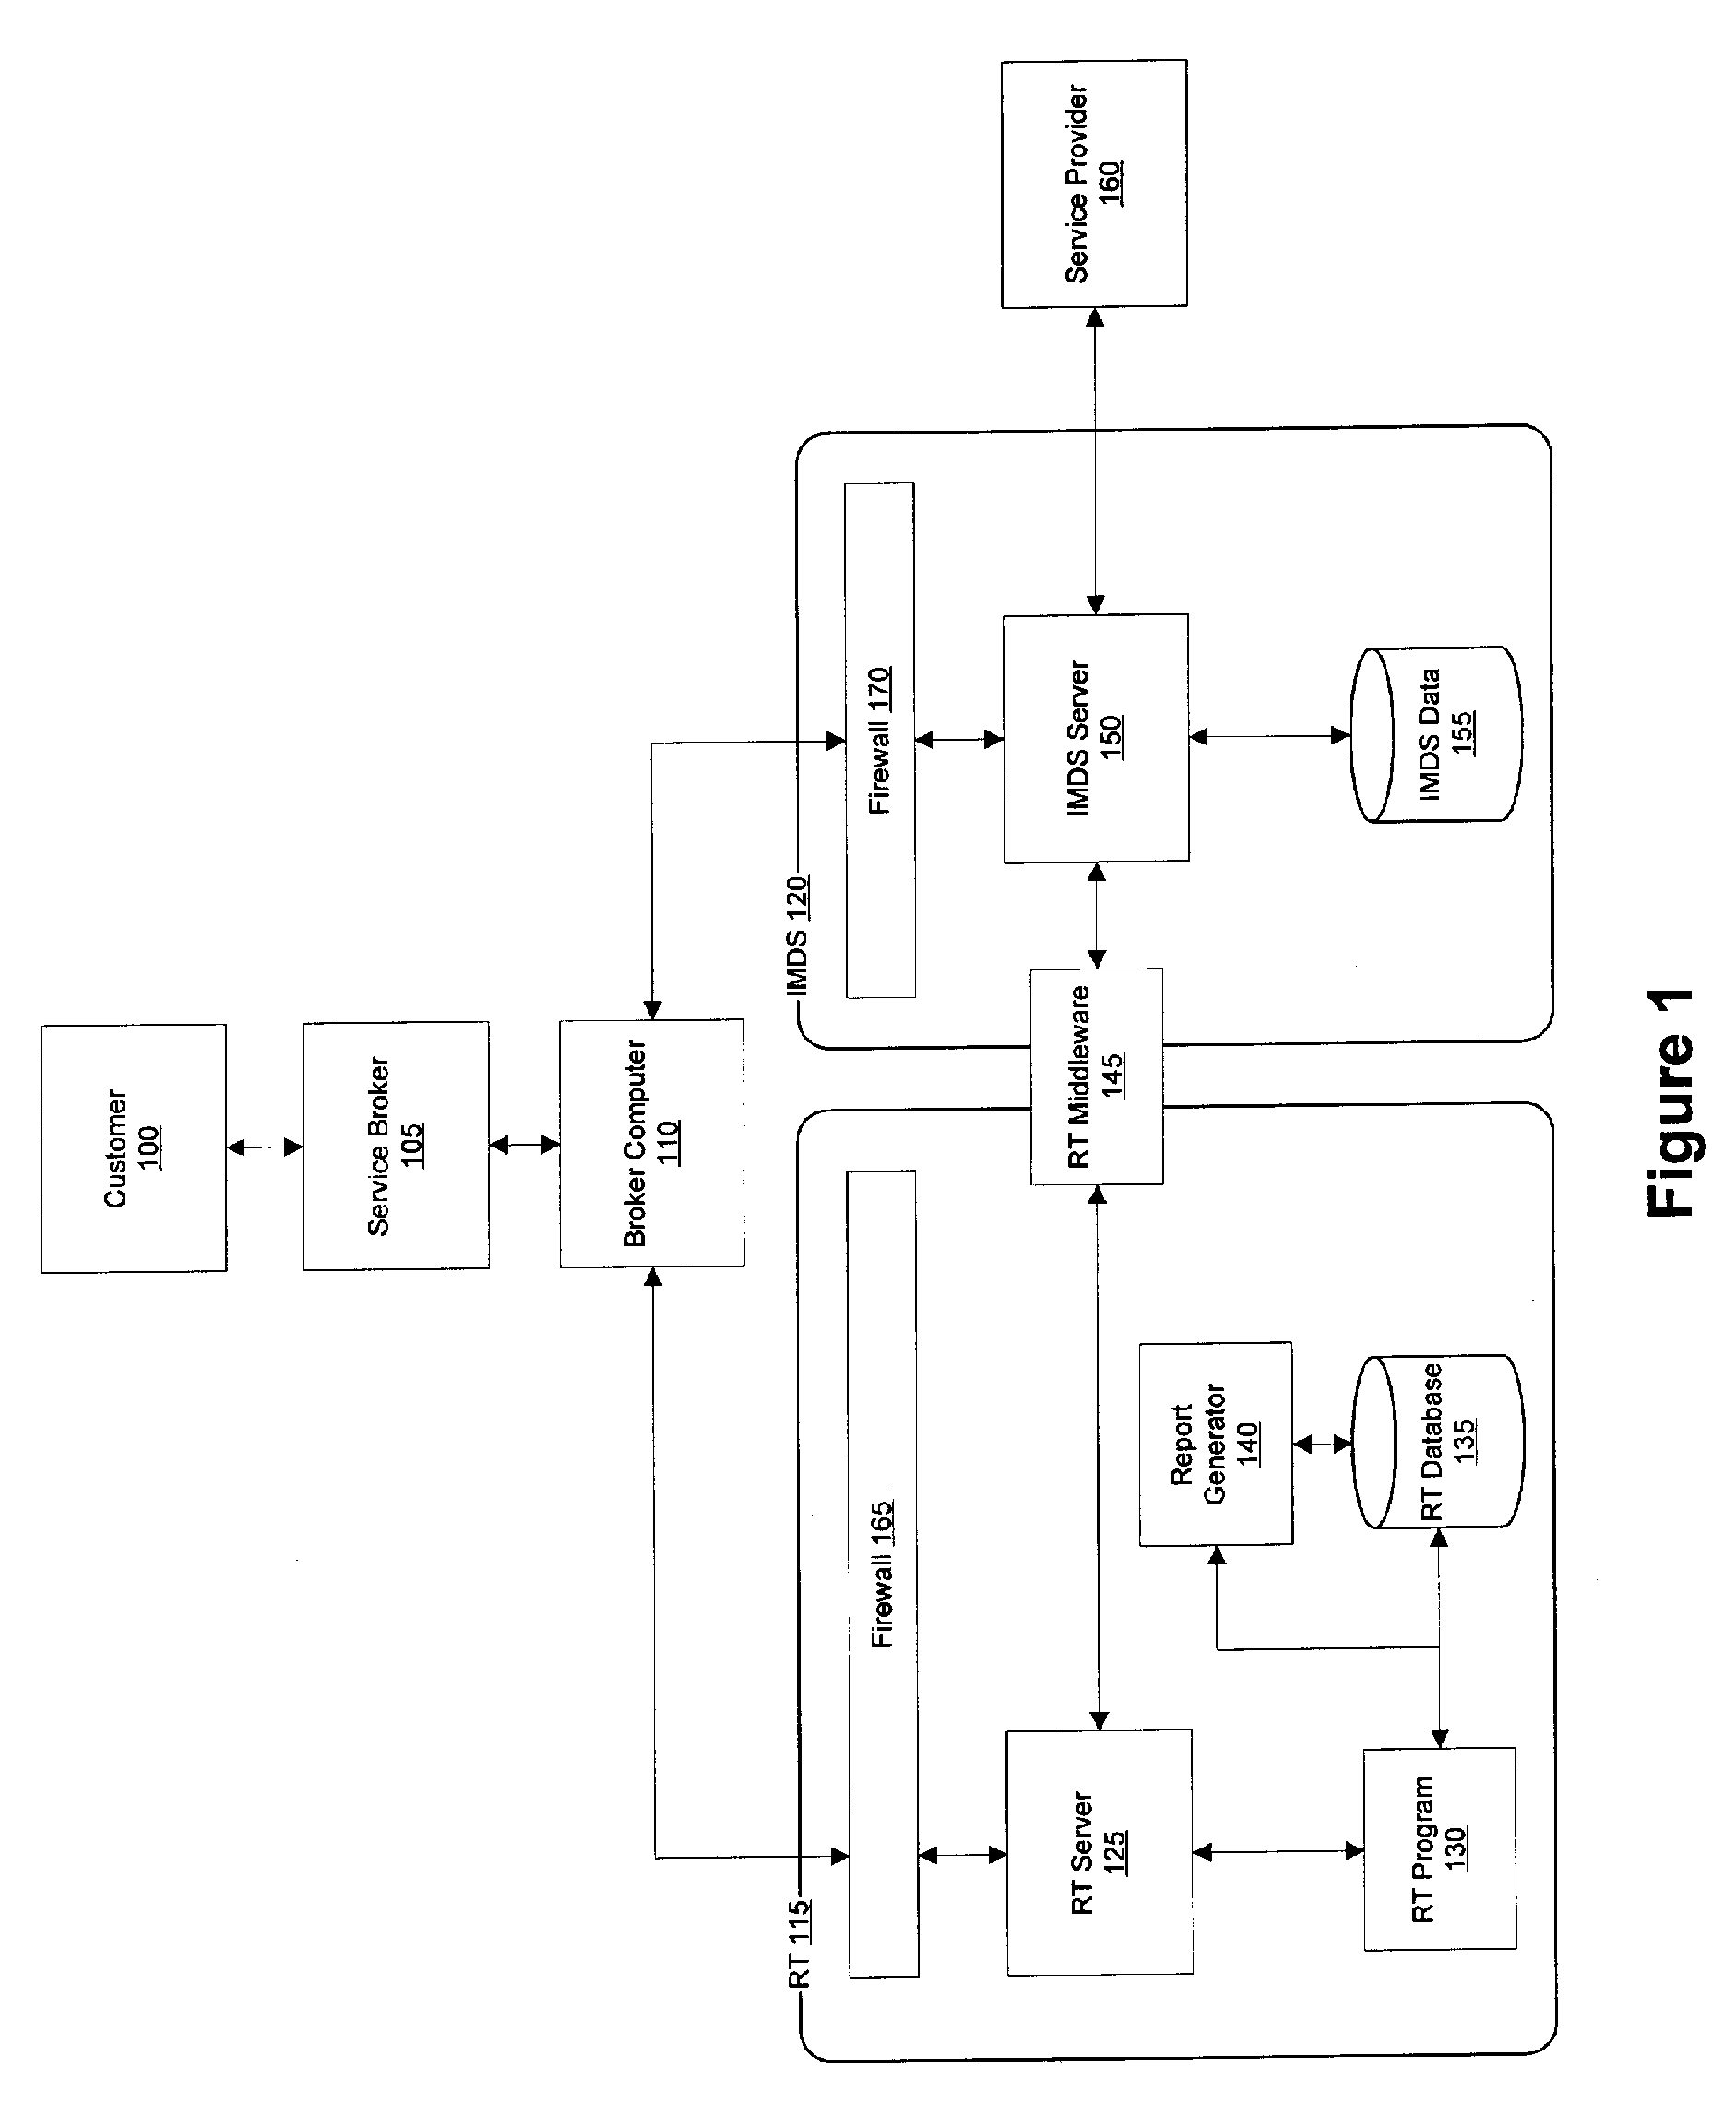 Rate validation system and method